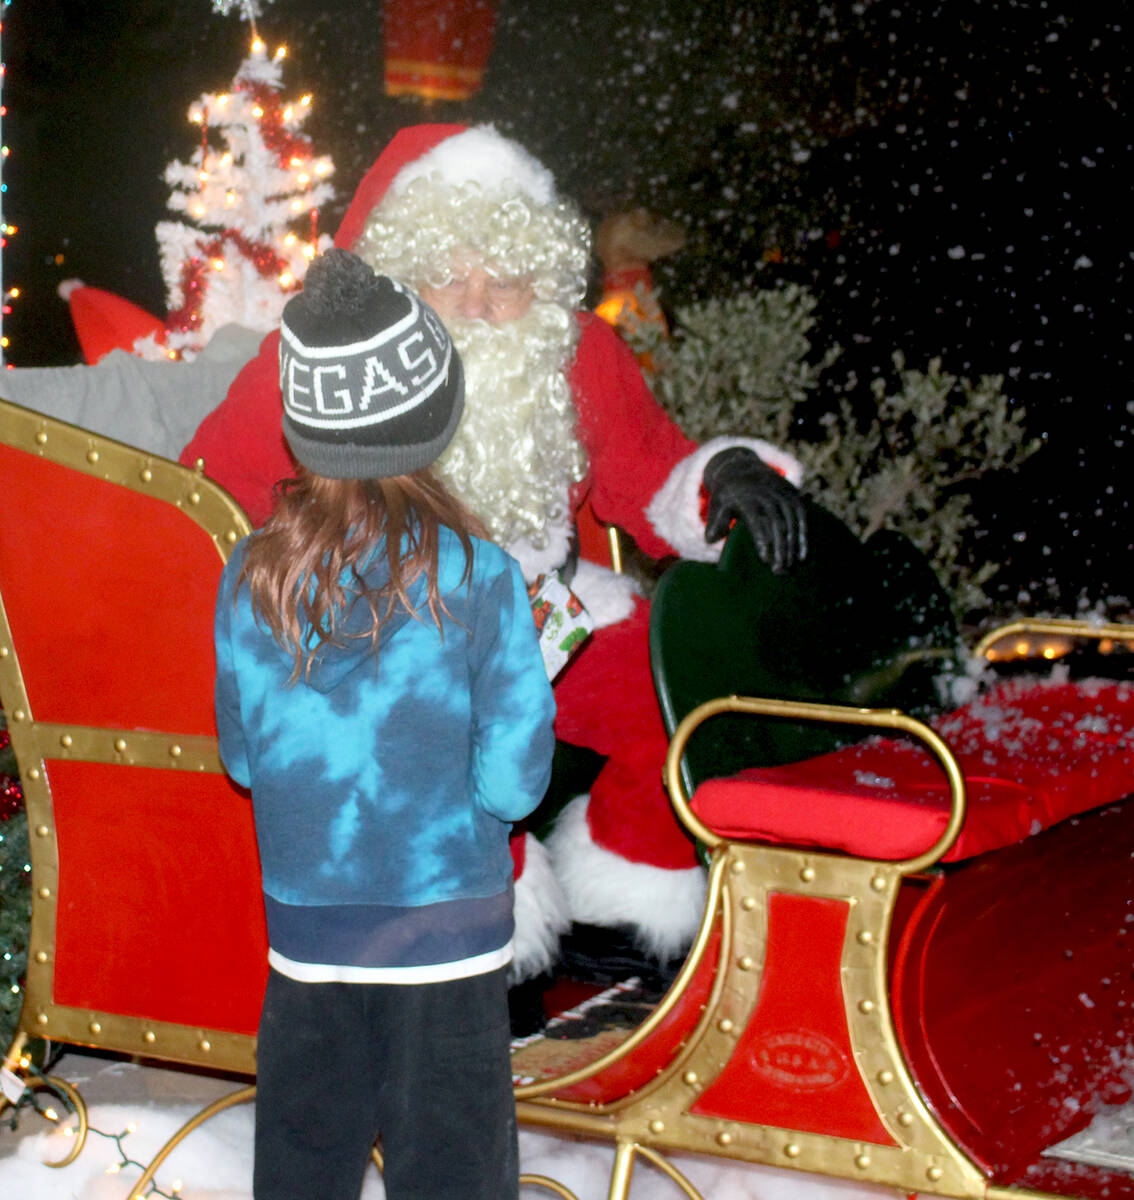 Robin Hebrock/Pahrump Valley Times Santa Claus is pictured speaking with a youngster at Christm ...